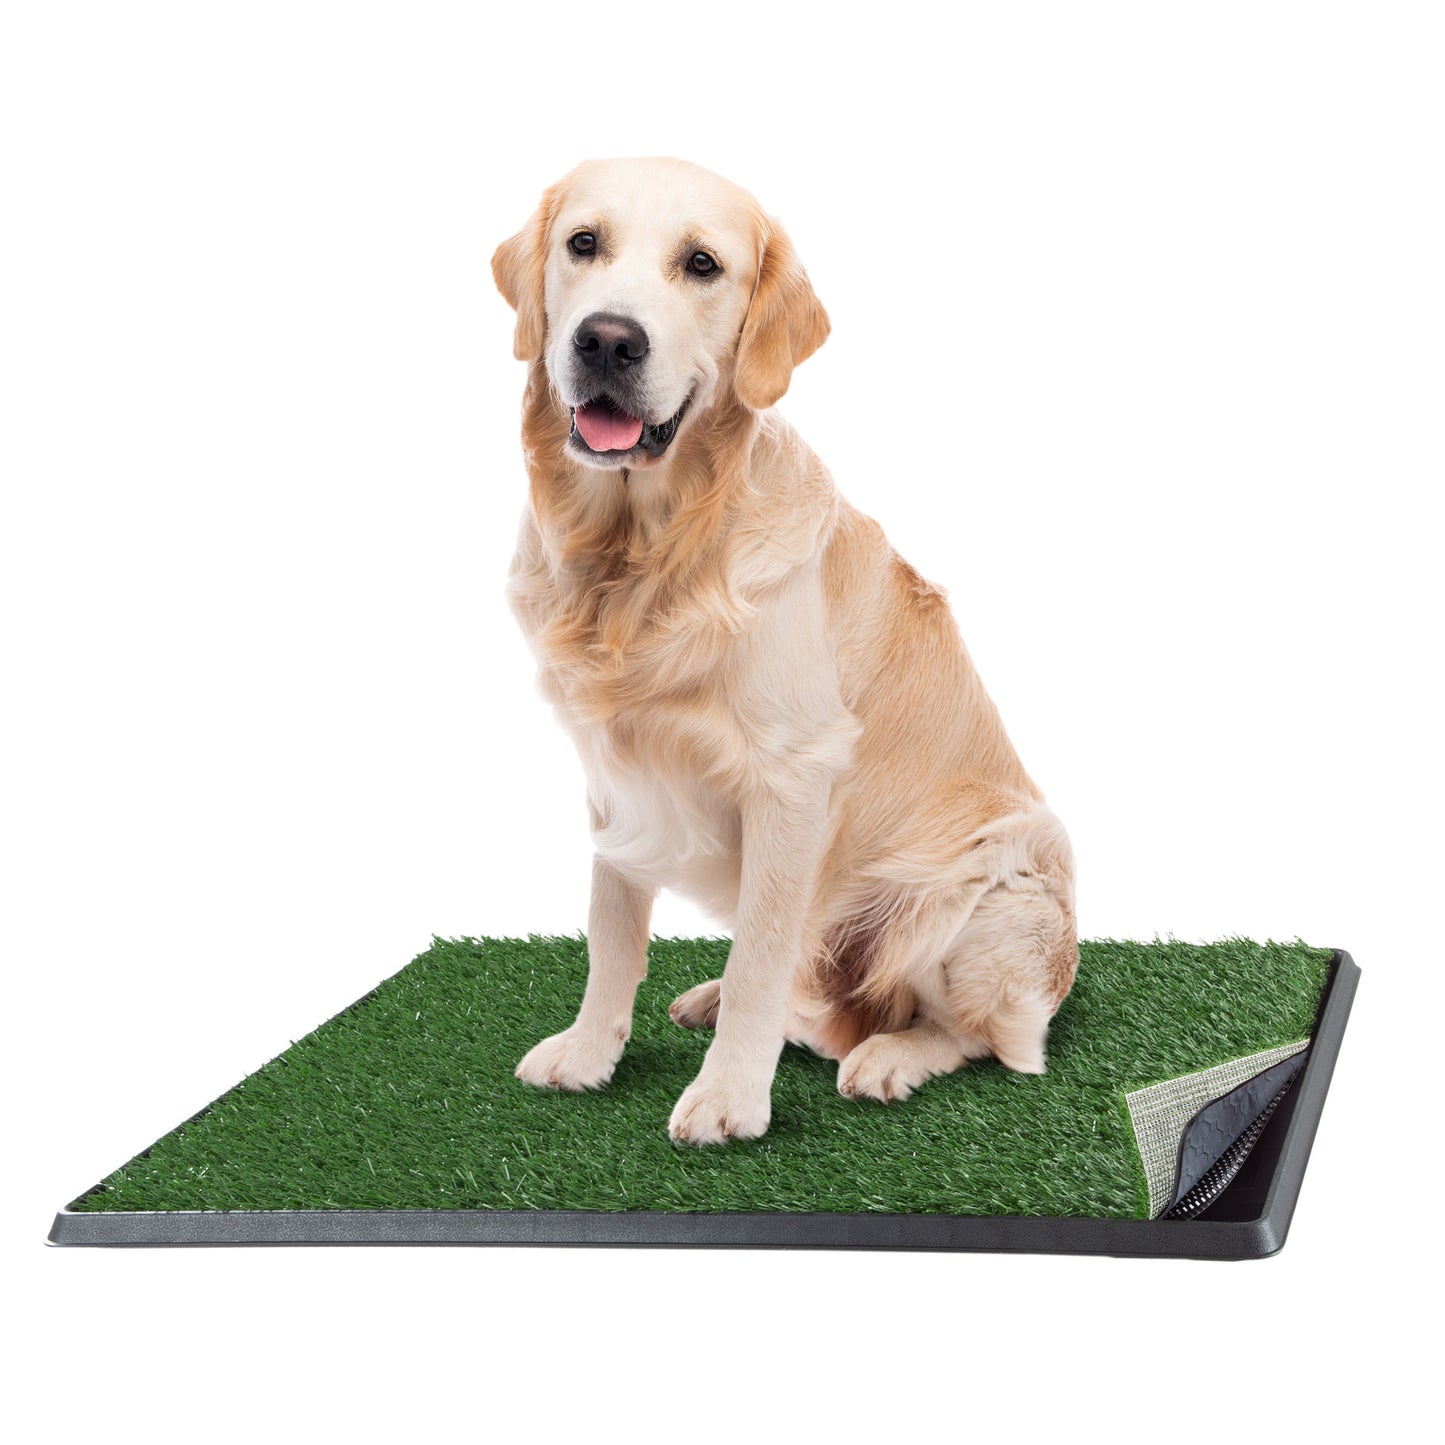 Golden retriever uses a pee pad and saves us any problems with soiled carpet.  